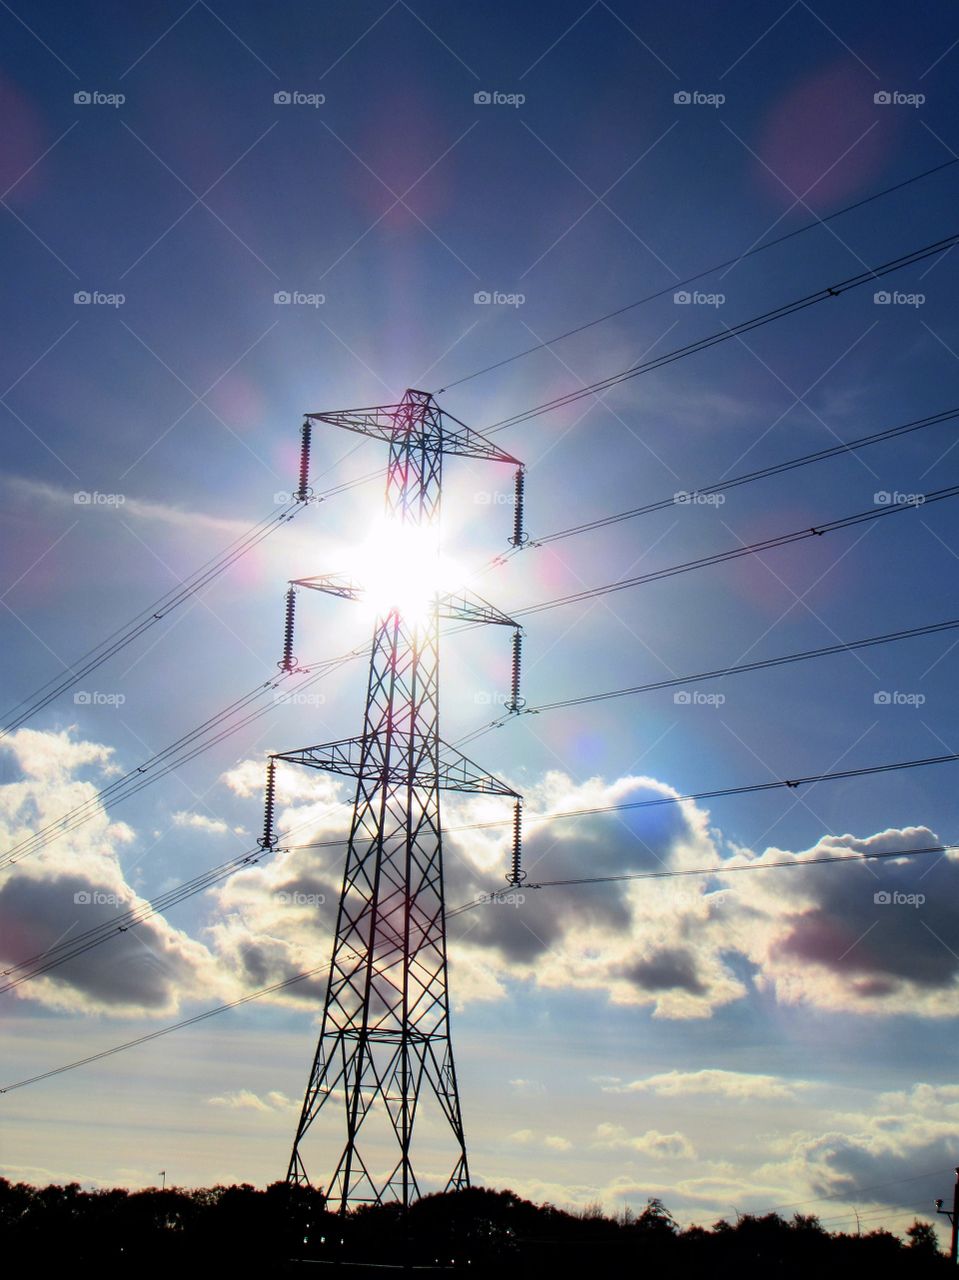 The Sun's rays appear to emit from the electricity pylon